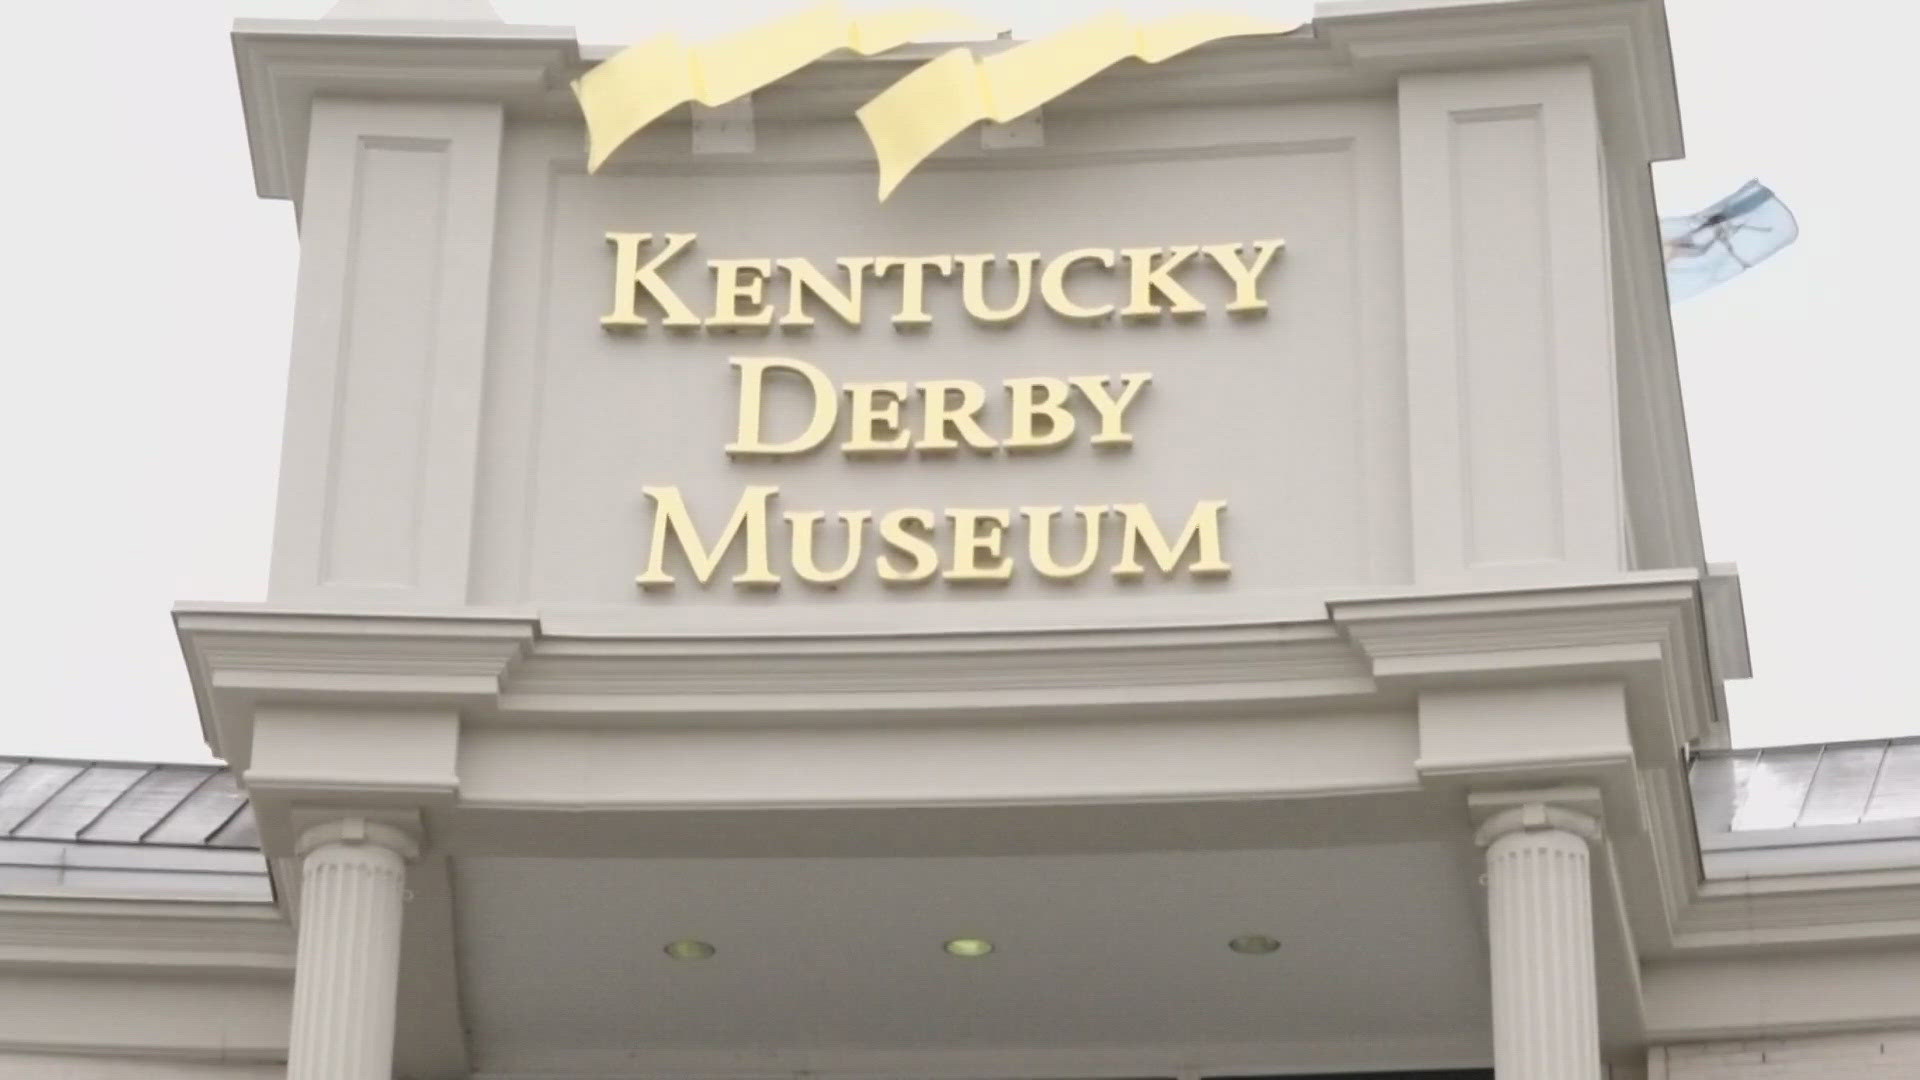 WHAS11 interviews Kentucky Derby Museum President Pat Armstrong on the backside of Churchill Downs.